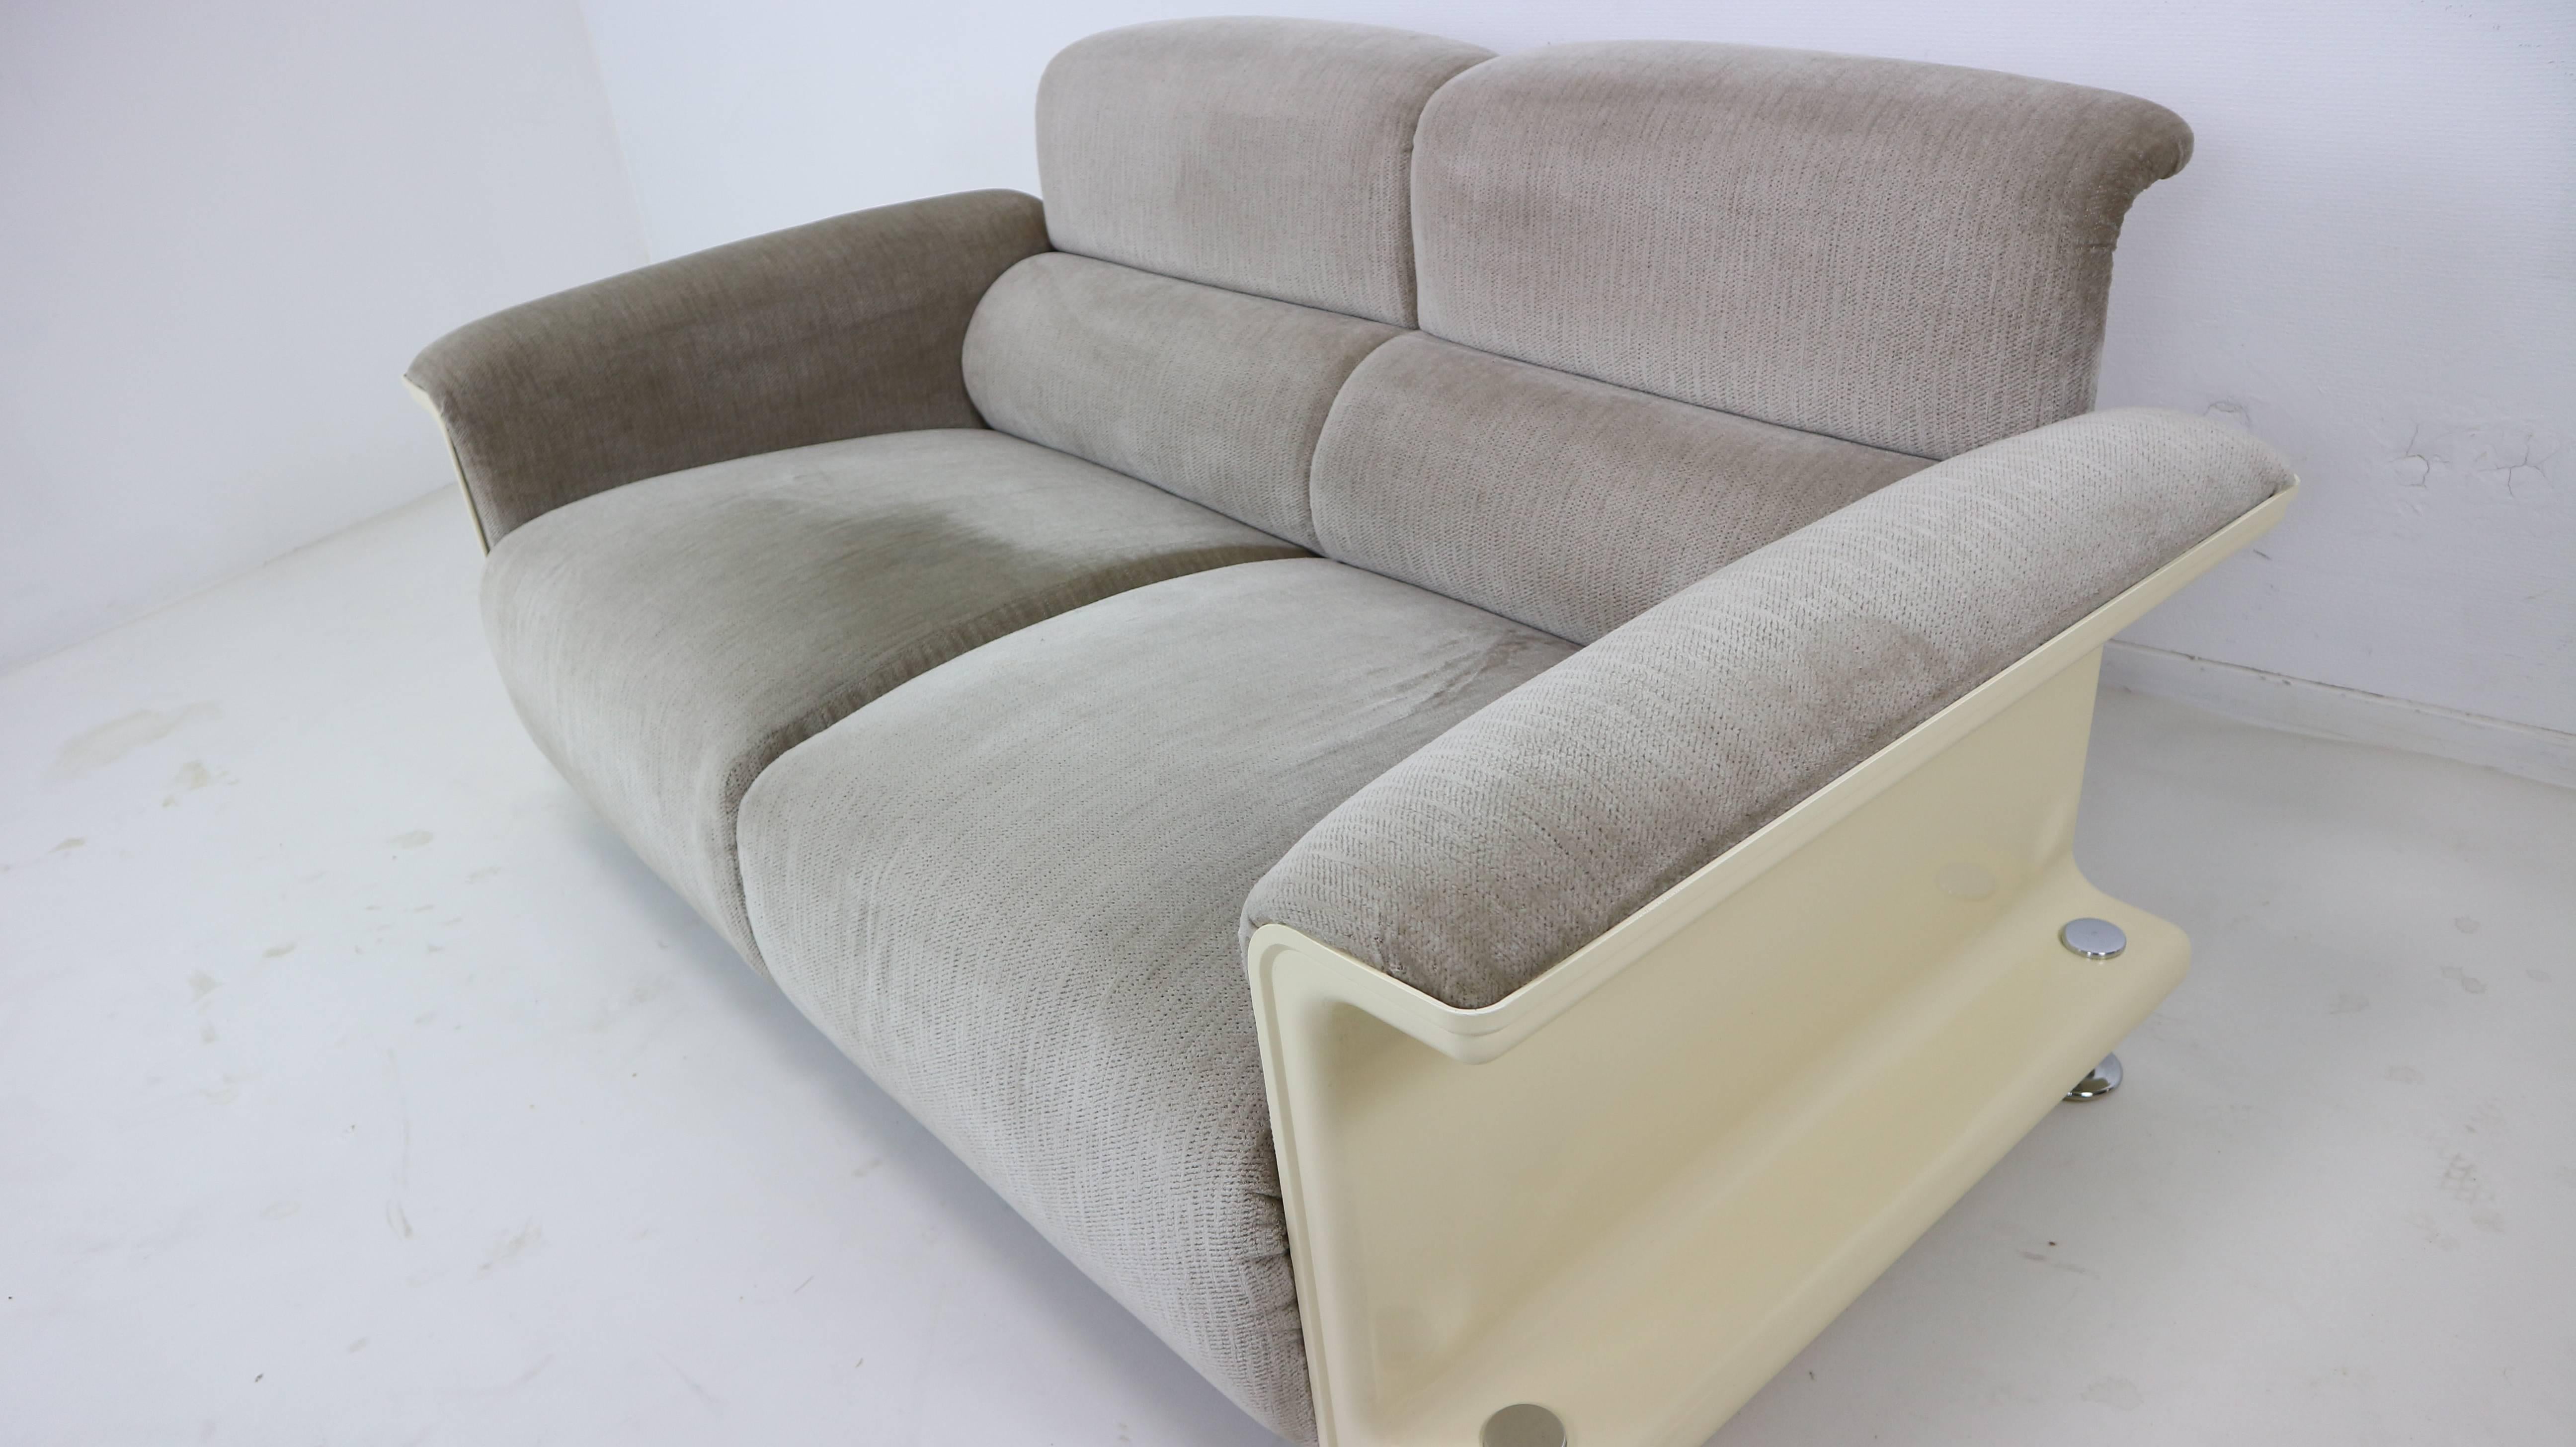 Beautifully designed two-seat sofa from the 1970s, made in the Netherlands. The shell is made from a hot-pressed sheet molding compound and its covered with a light gray velvet upholstery. 

 

 